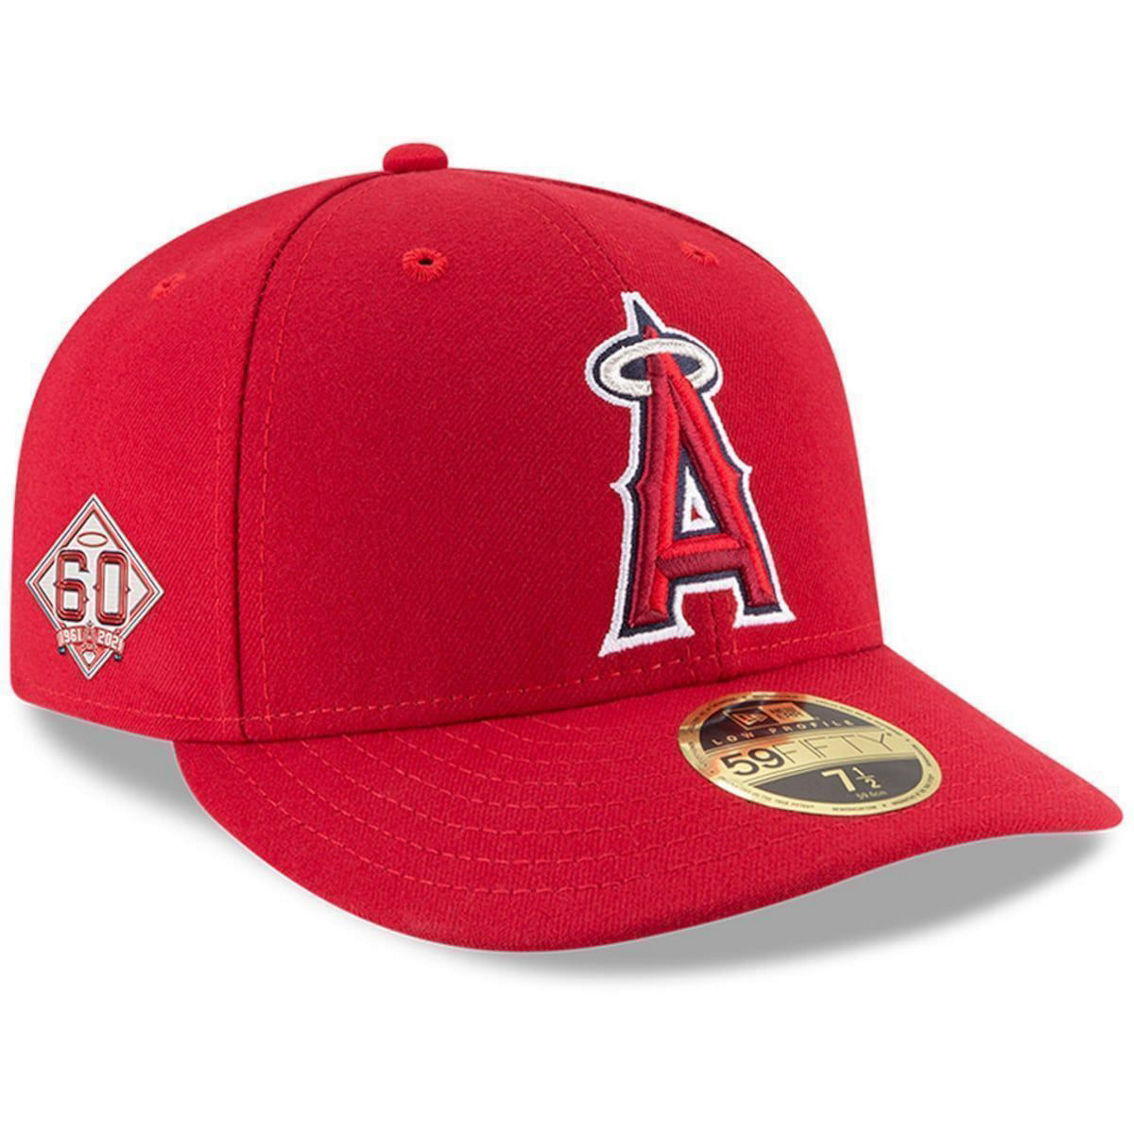 New Era Men's Red Los Angeles Angels 60th Anniversary Authentic Collection  On-field Low 59fifty Fitted Hat, Hats & Visors, Clothing & Accessories